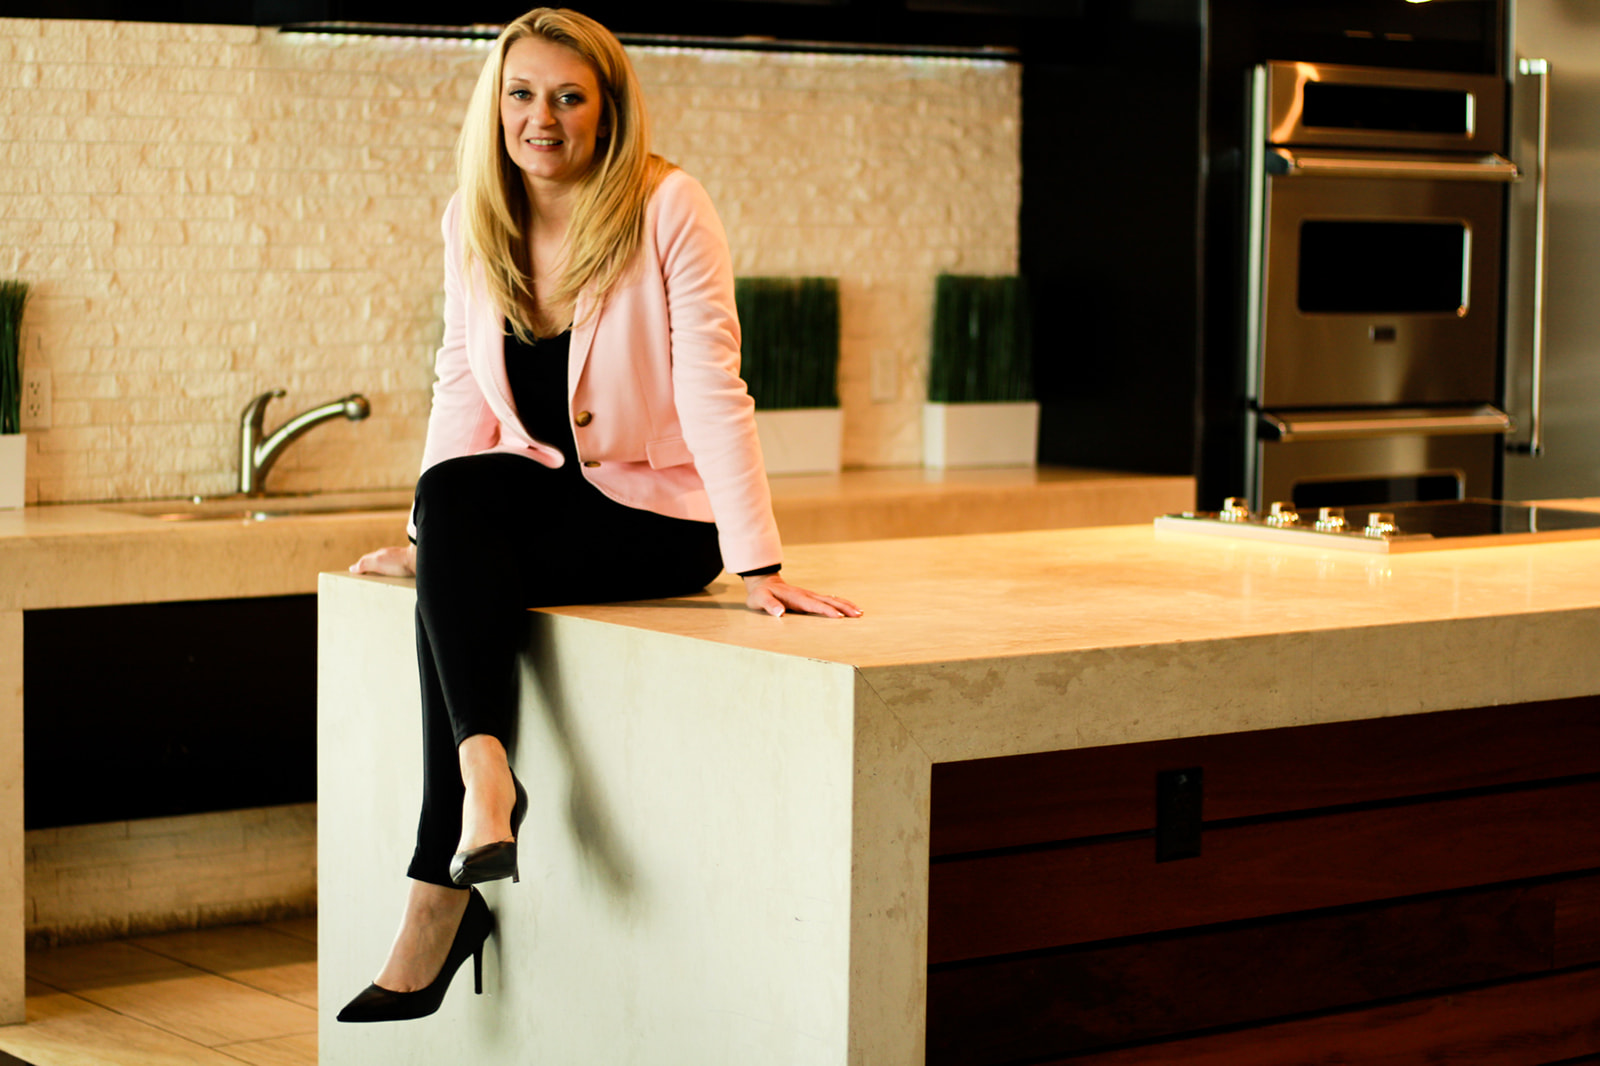 julia calaghan nutritionist sitting on table